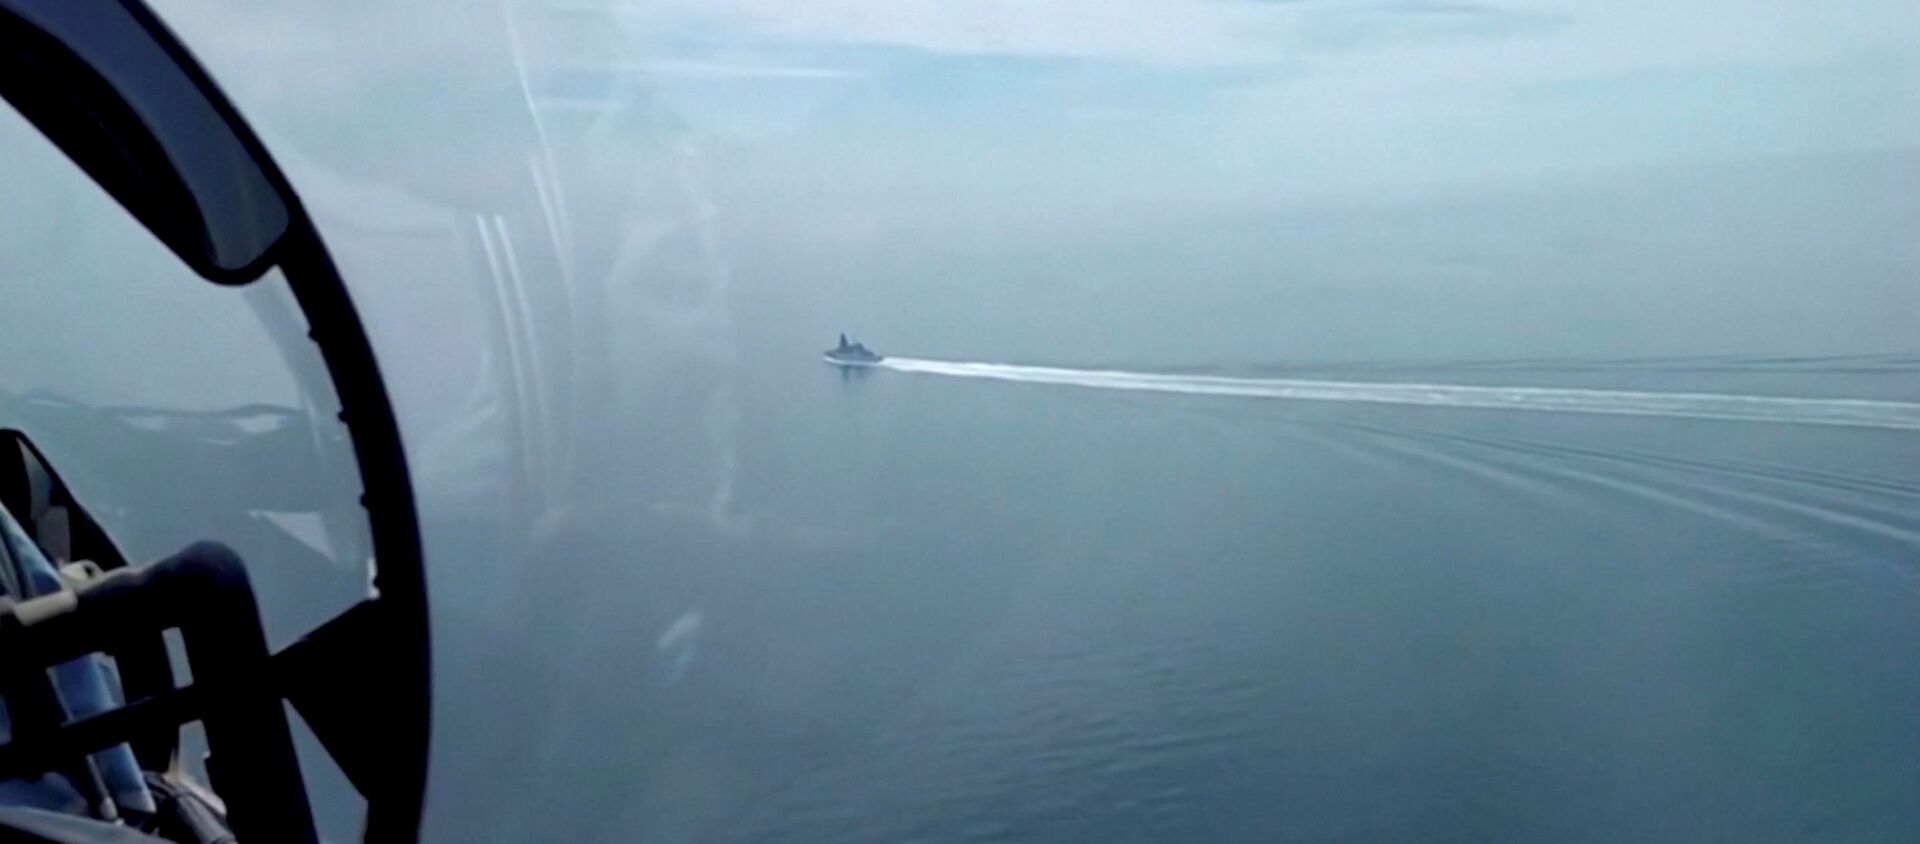 A still image taken from a video released by Russia's Defence Ministry allegedly shows British Royal Navy's Type 45 destroyer HMS Defender filmed from a Russian military aircraft in the Black Sea, June 23, 2021. - Sputnik International, 1920, 24.06.2021